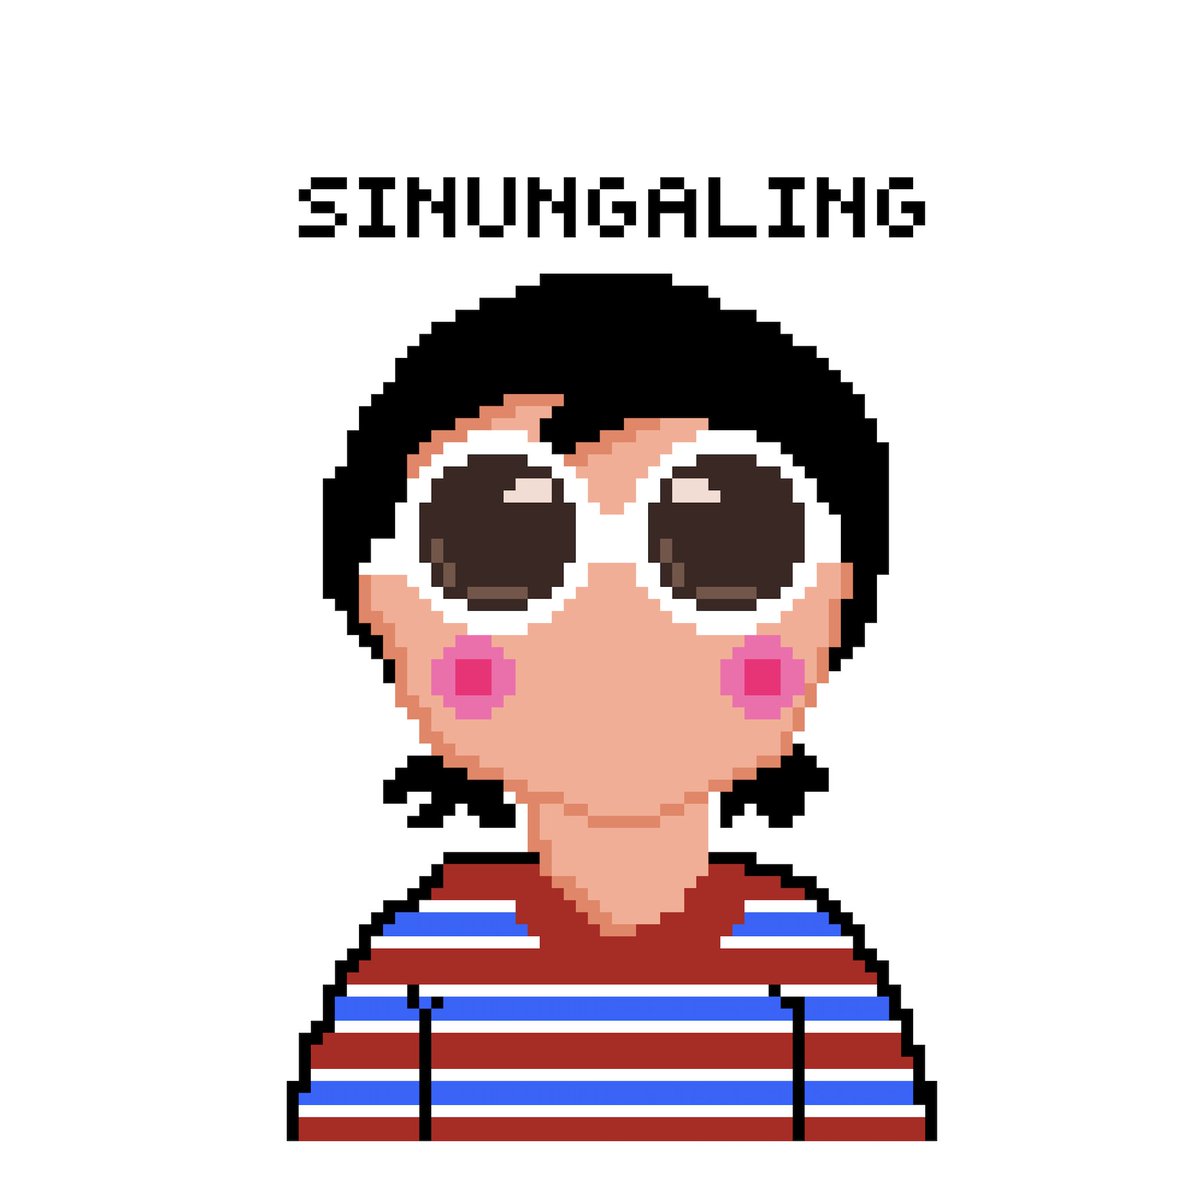 hello, friends.

'sinungaling' and my new song 'dila' is now out everywhere. the cover art for both songs are some of the fan artworks that i really liked.

dila: zild.lnk.to/dila
sinungaling: zild.lnk.to/sinungaling

dila mv at 6PM tonight : youtu.be/gTk6uuRcmpI

n_n